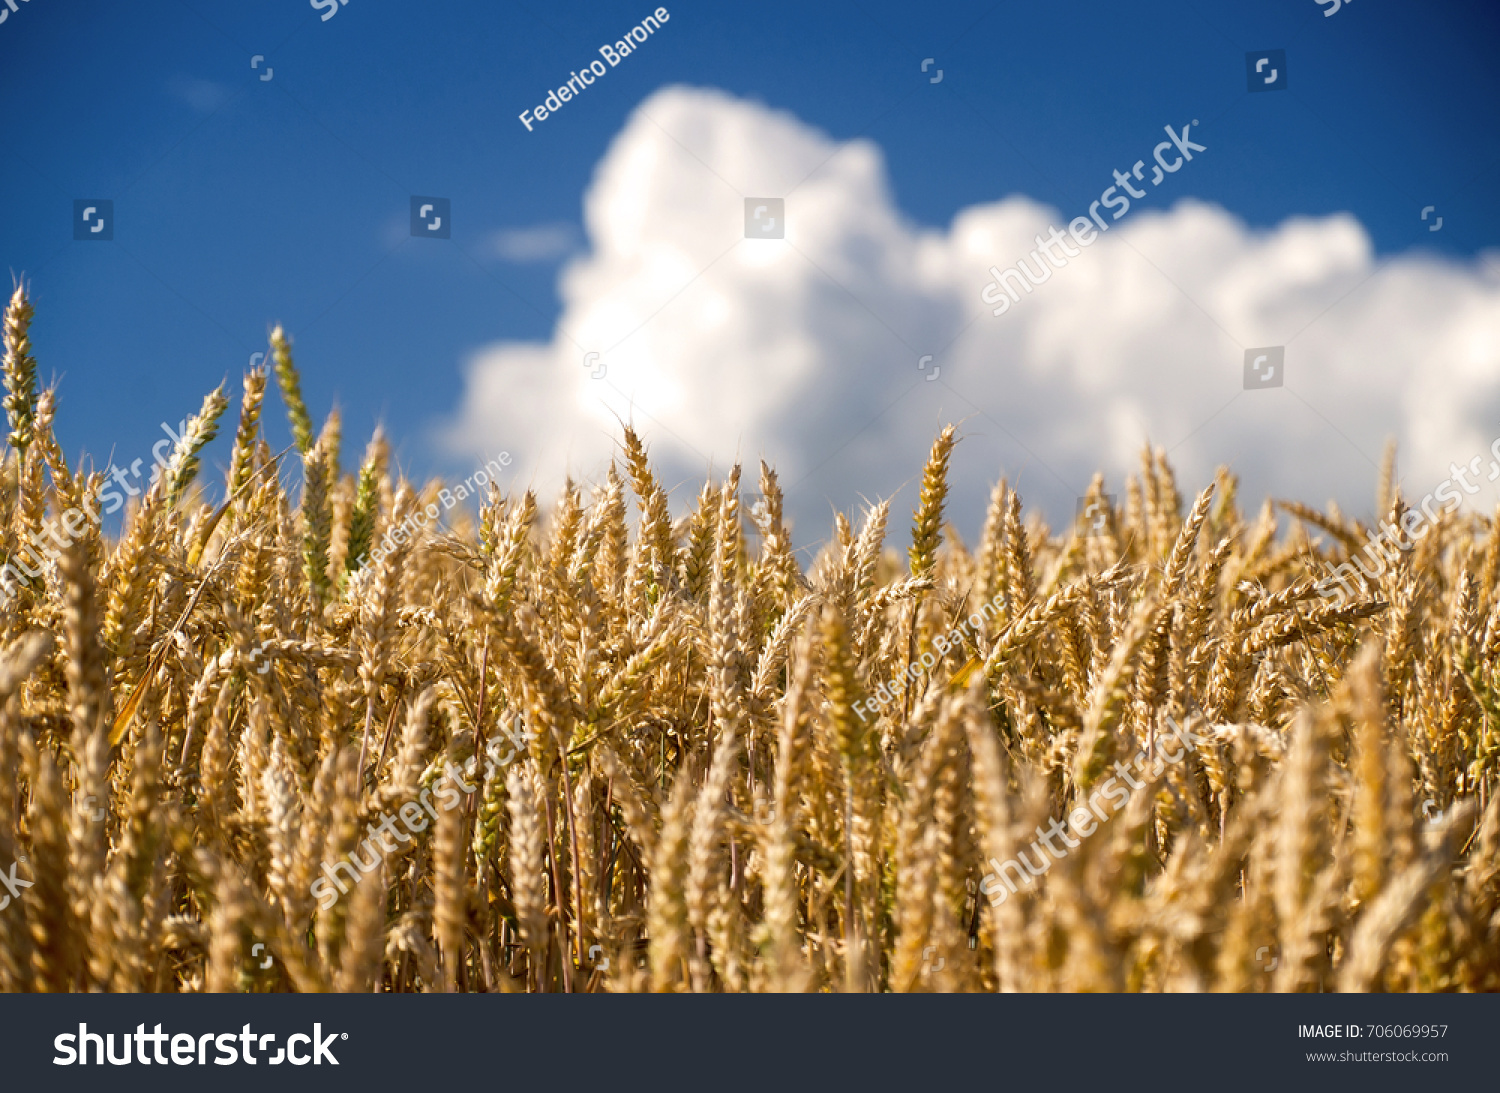 stock-photo-close-up-shot-of-wheat-ears-